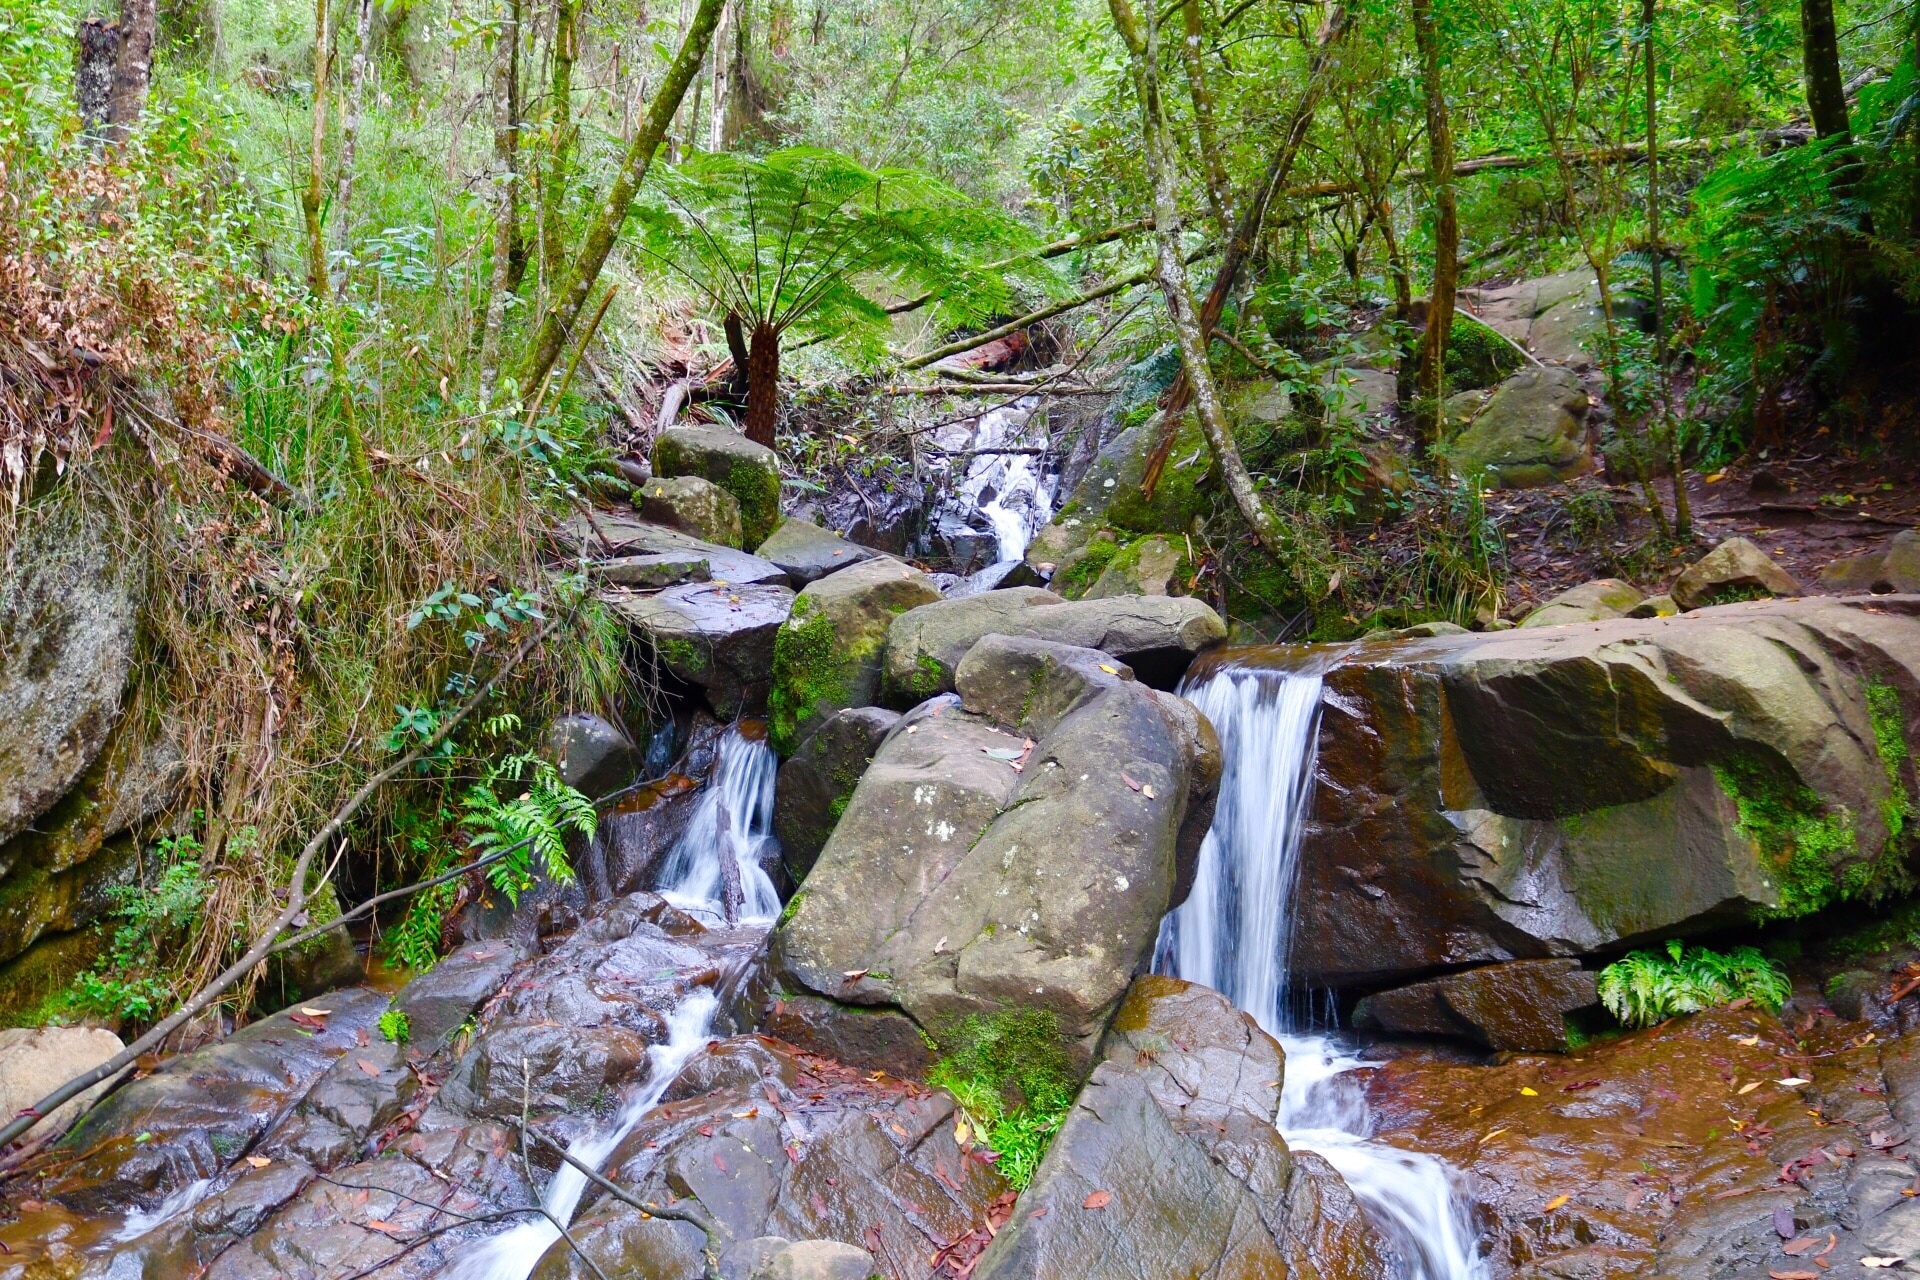 A nice little waterfall on Mt Dandenong. It's best to get off the track and climb up the waterfall for the best views and photos. (Can be super slippery and muddy when wet). 